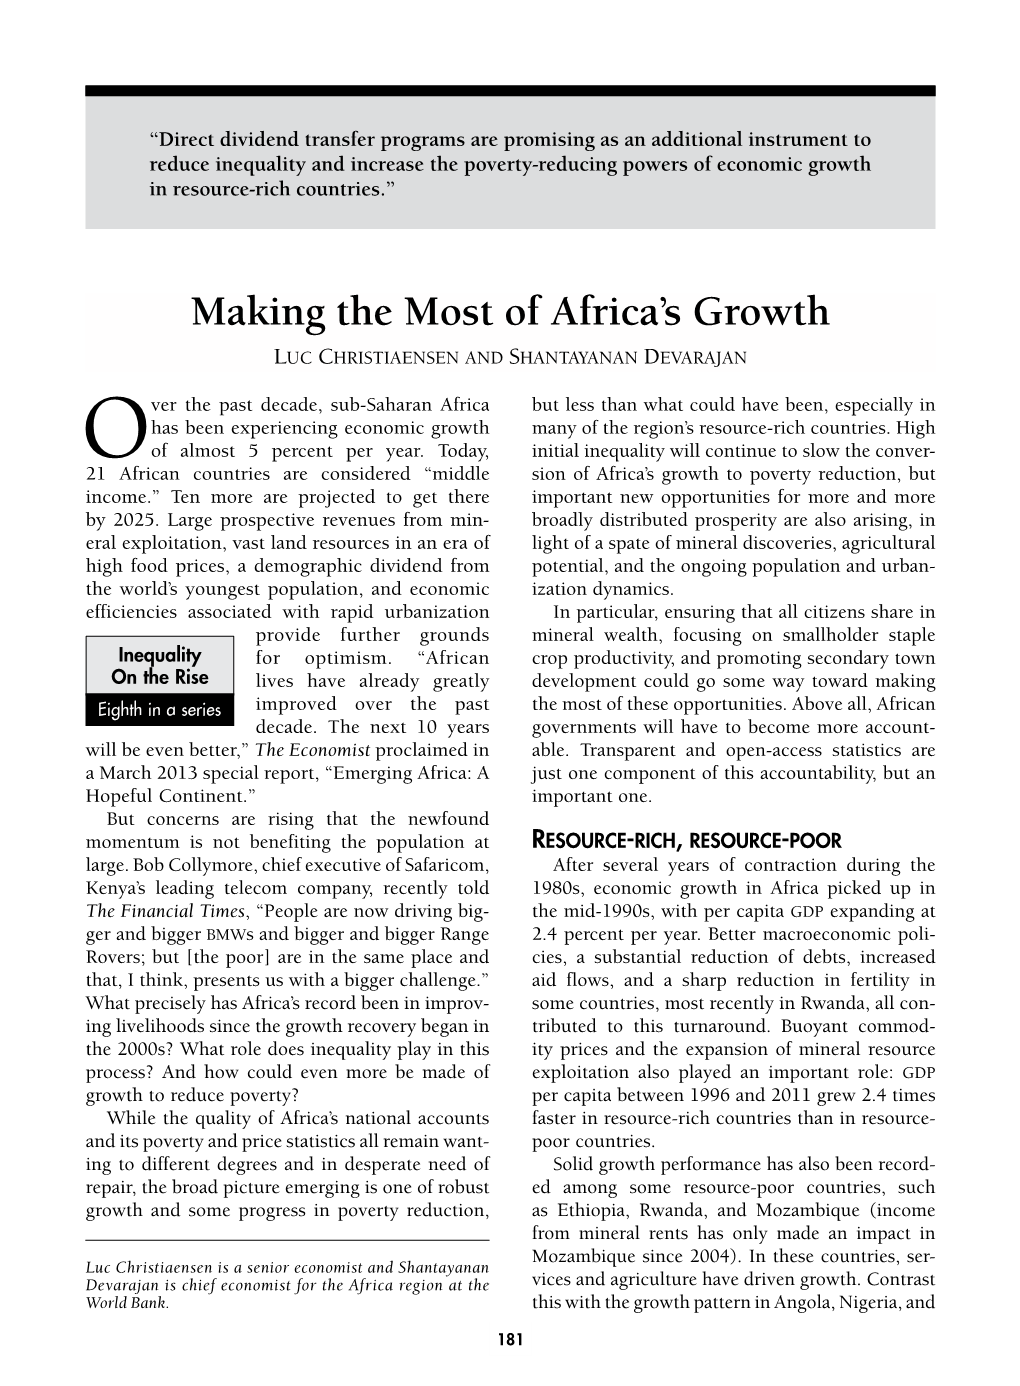 Making the Most of Africa's Growth